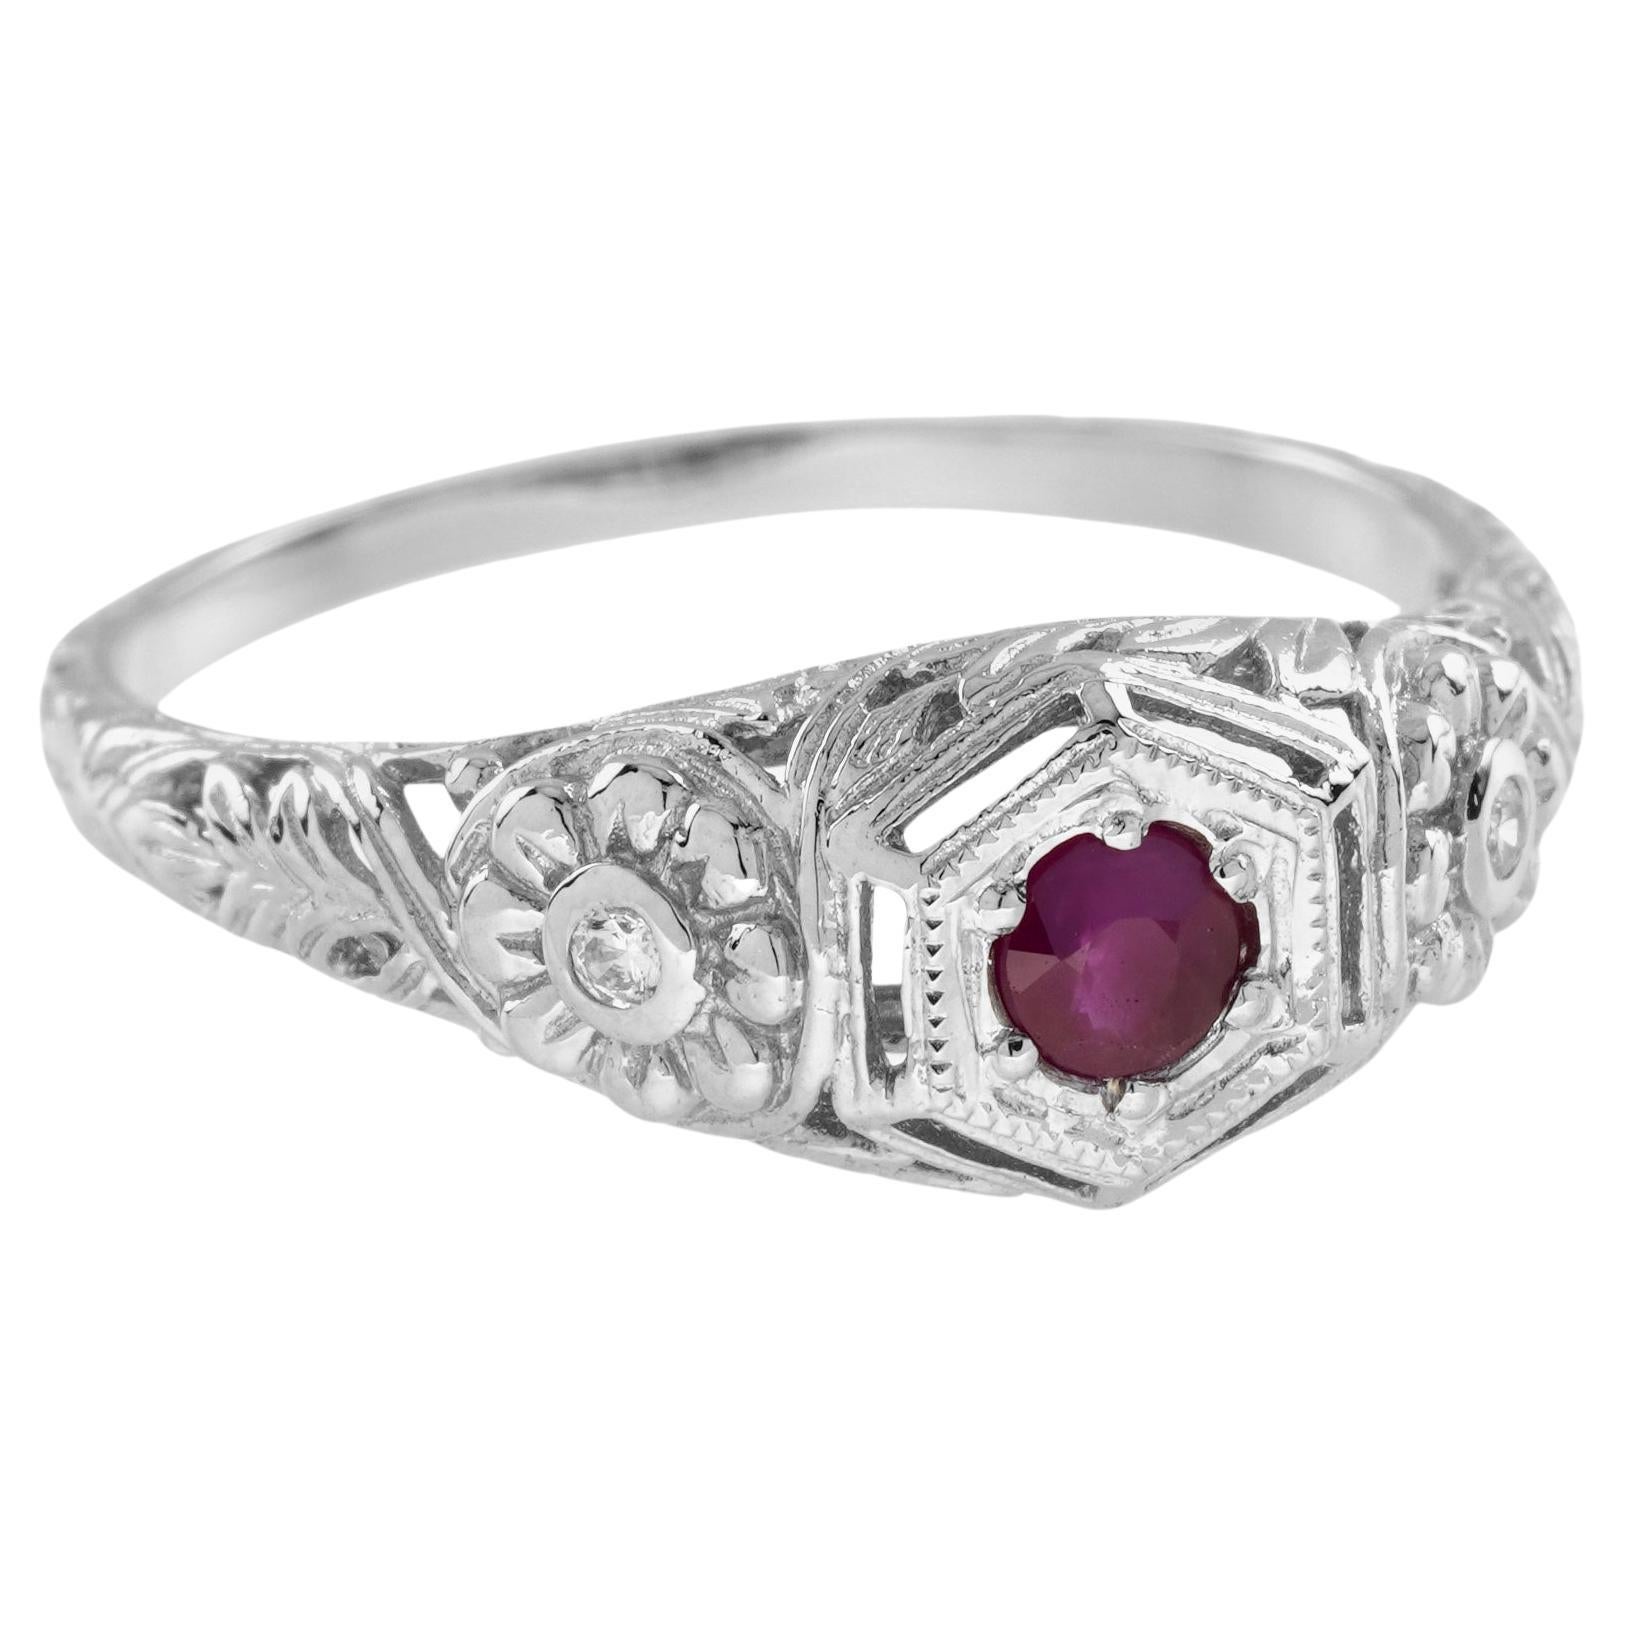 Natural Ruby Diamond Vintage Style Floral Filigree Ring in 9K White Gold